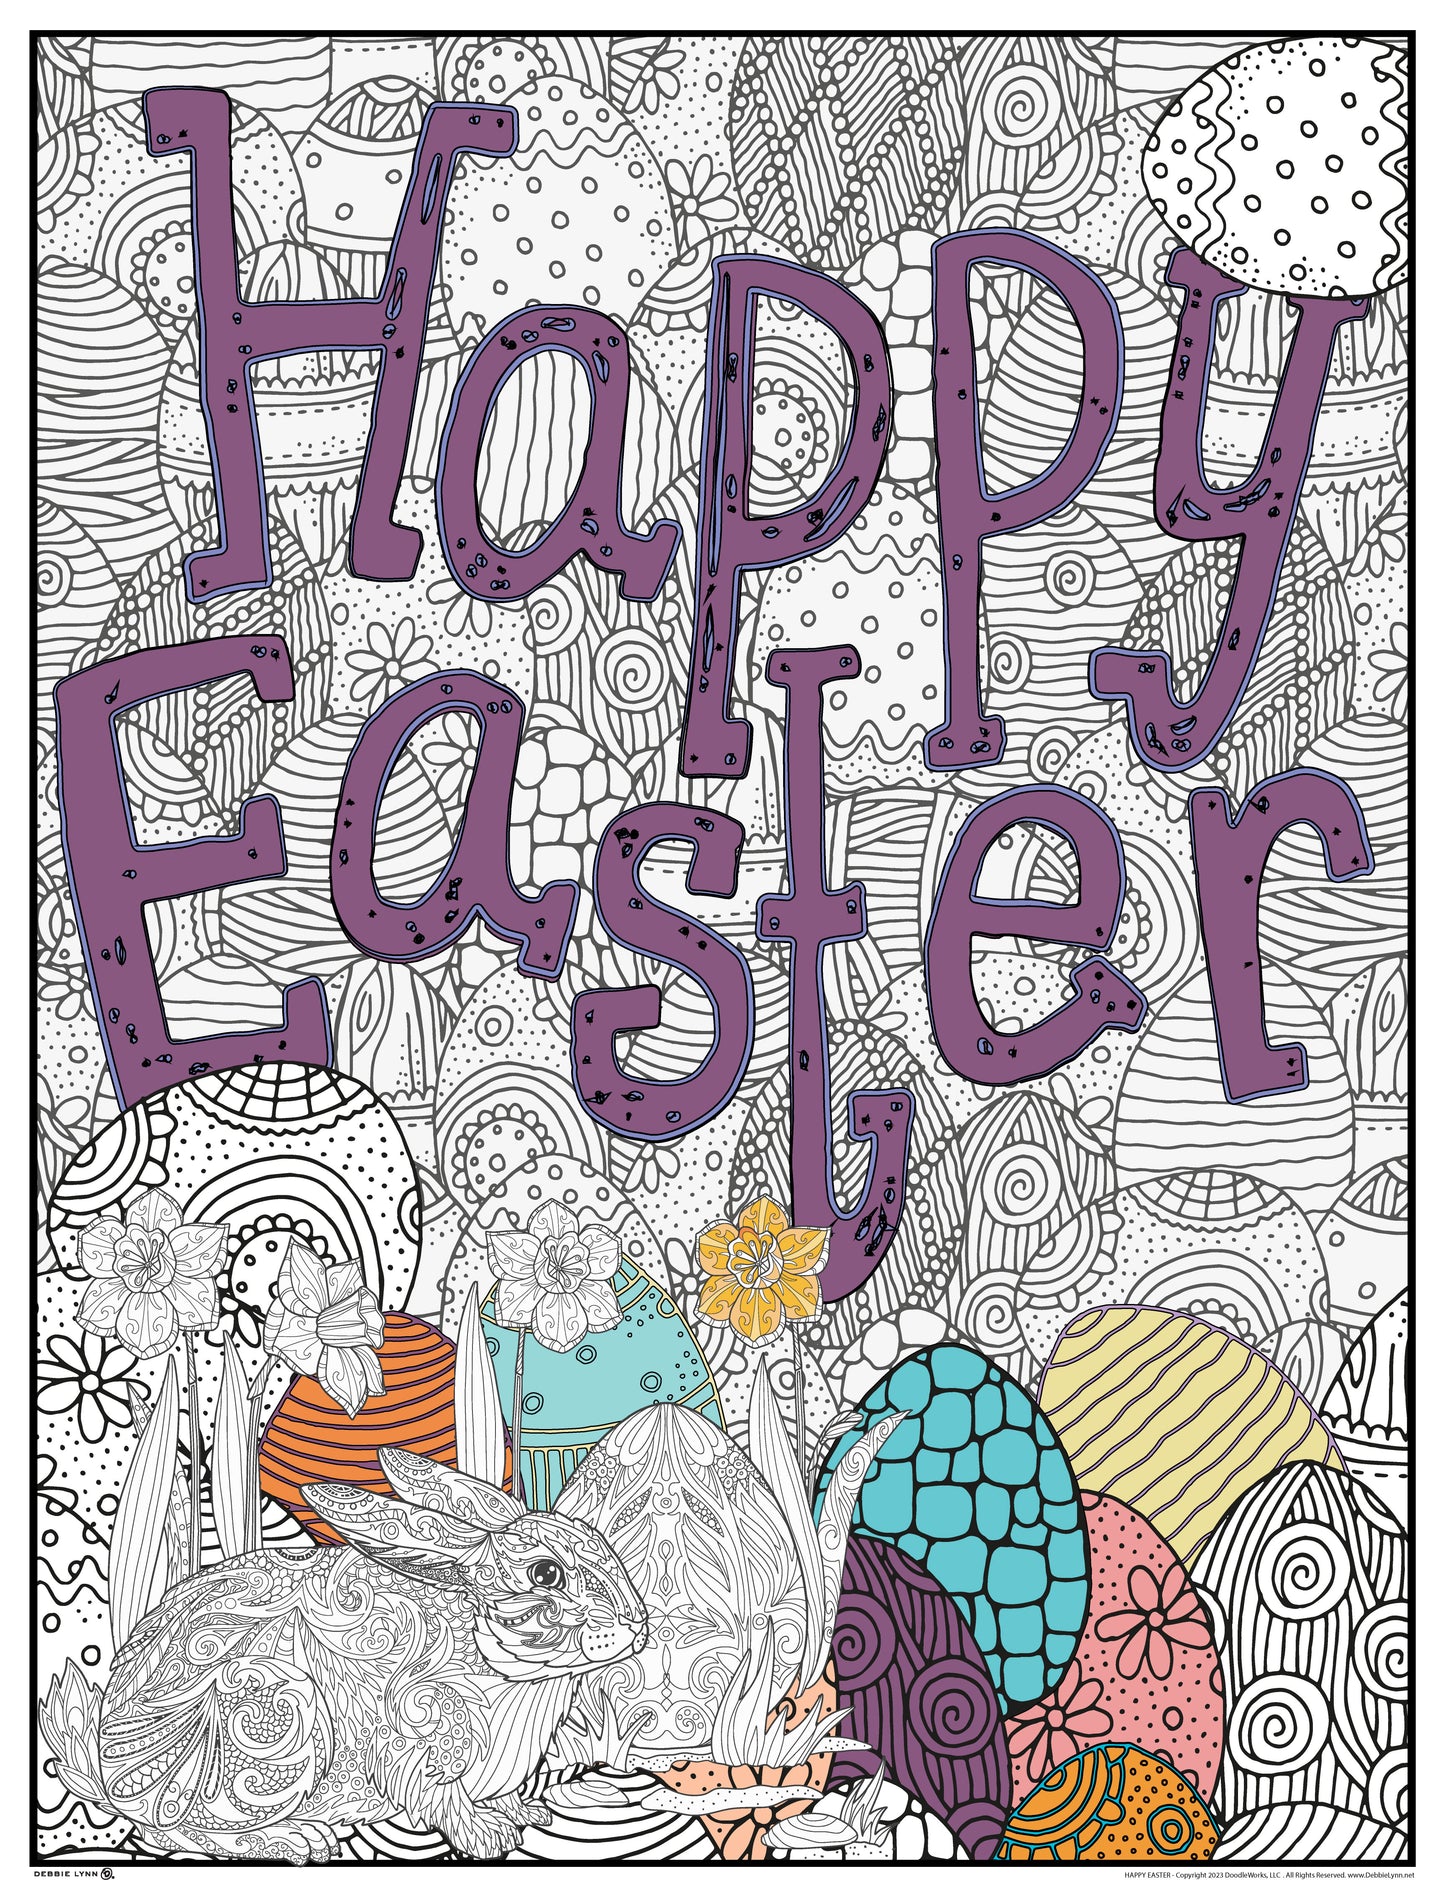 Happy Easter Personalized Giant Coloring Poster 46"x60"